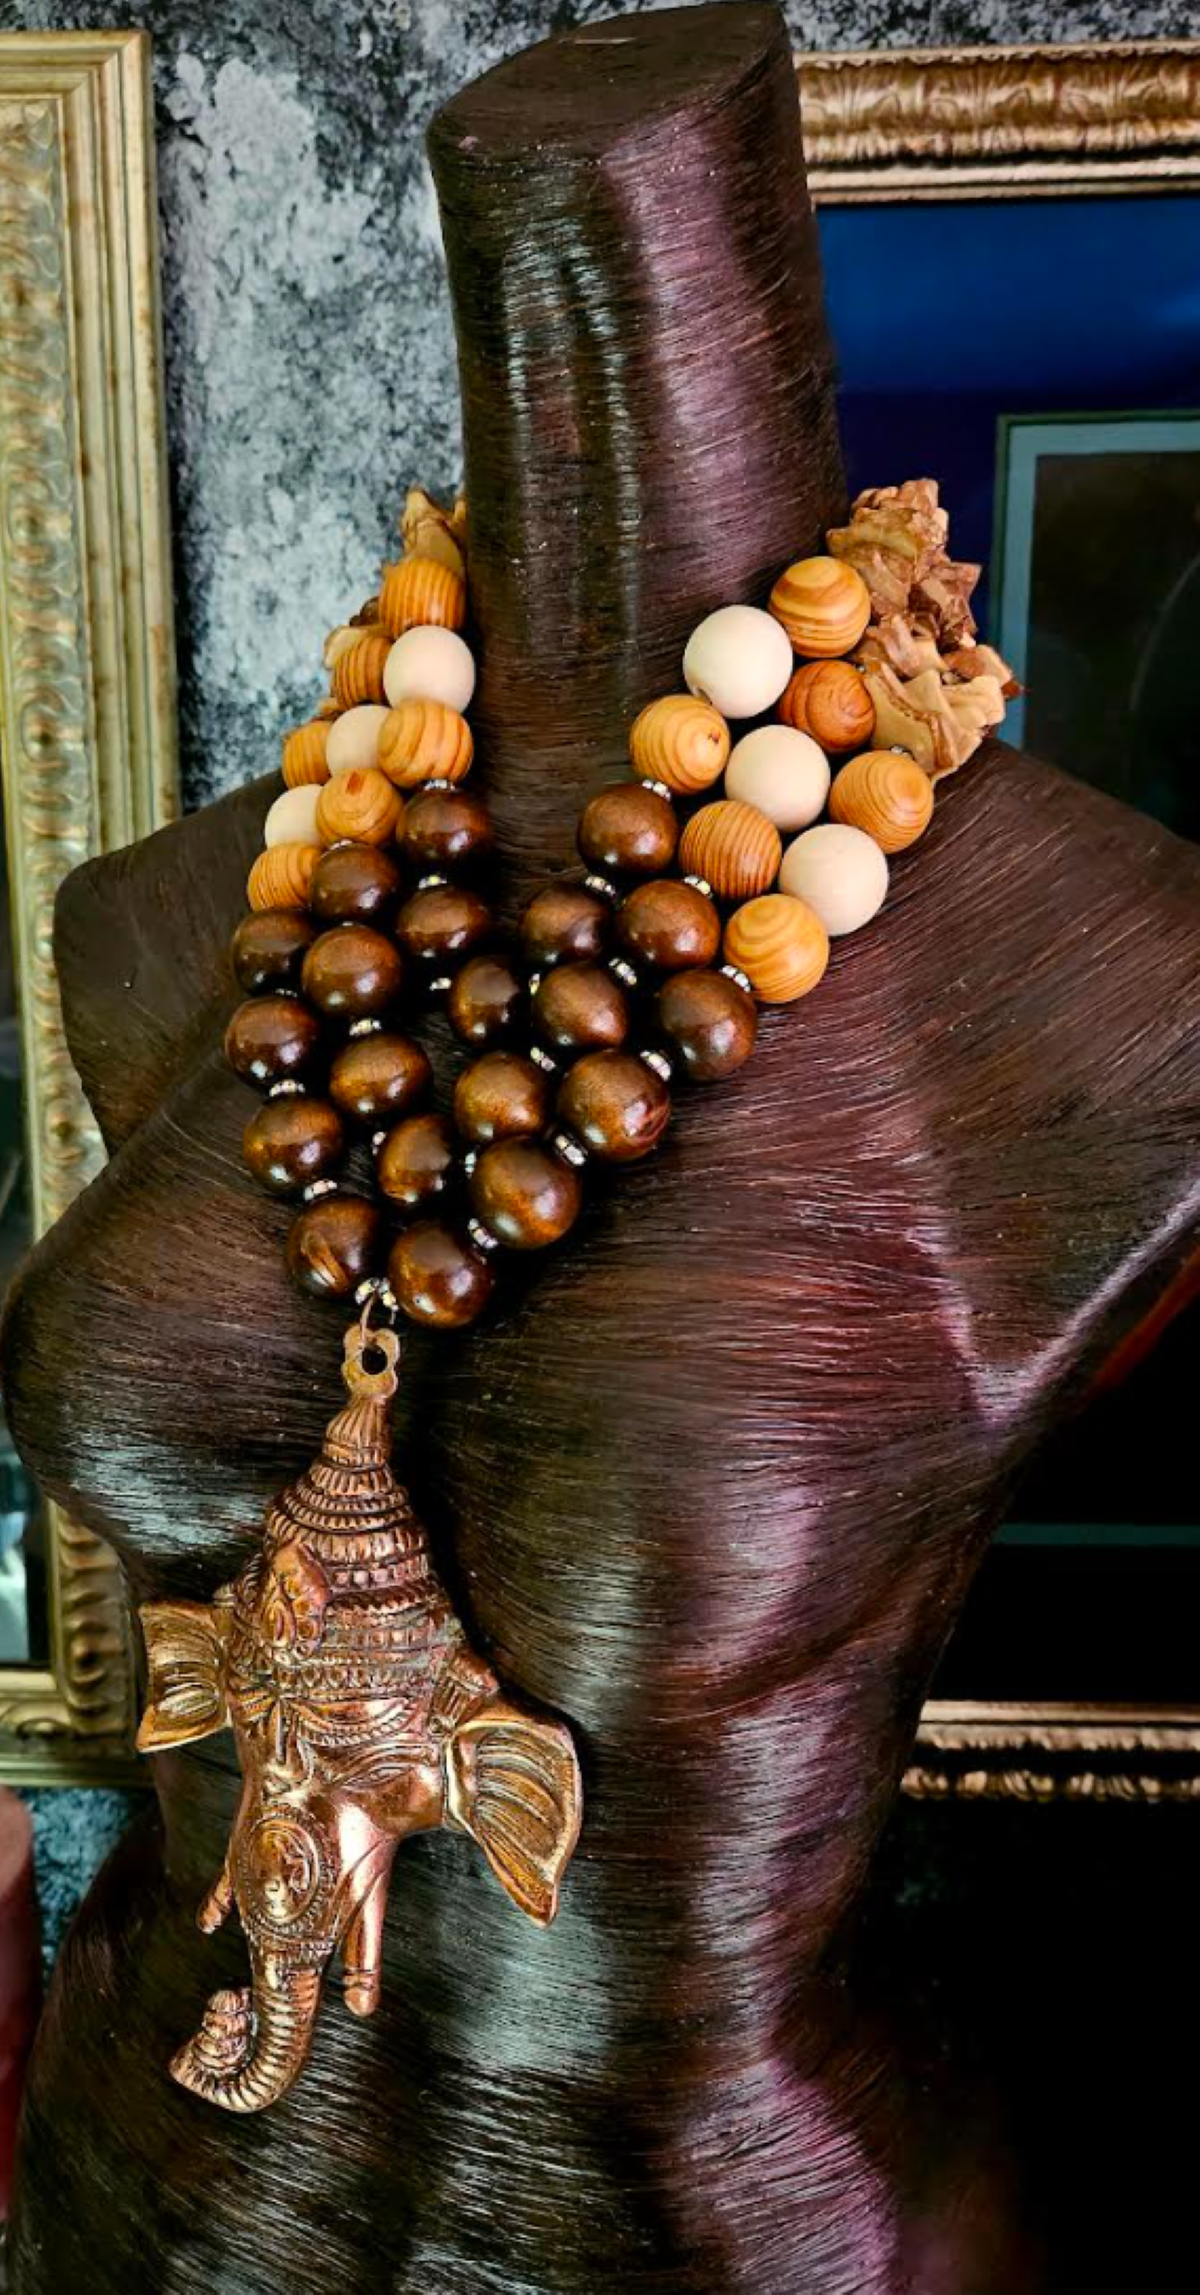 Earth Tone Oversized Beaded Statement Necklace with Ganesh God Pendant, Exotic Tribal Lightweight Chest Piece